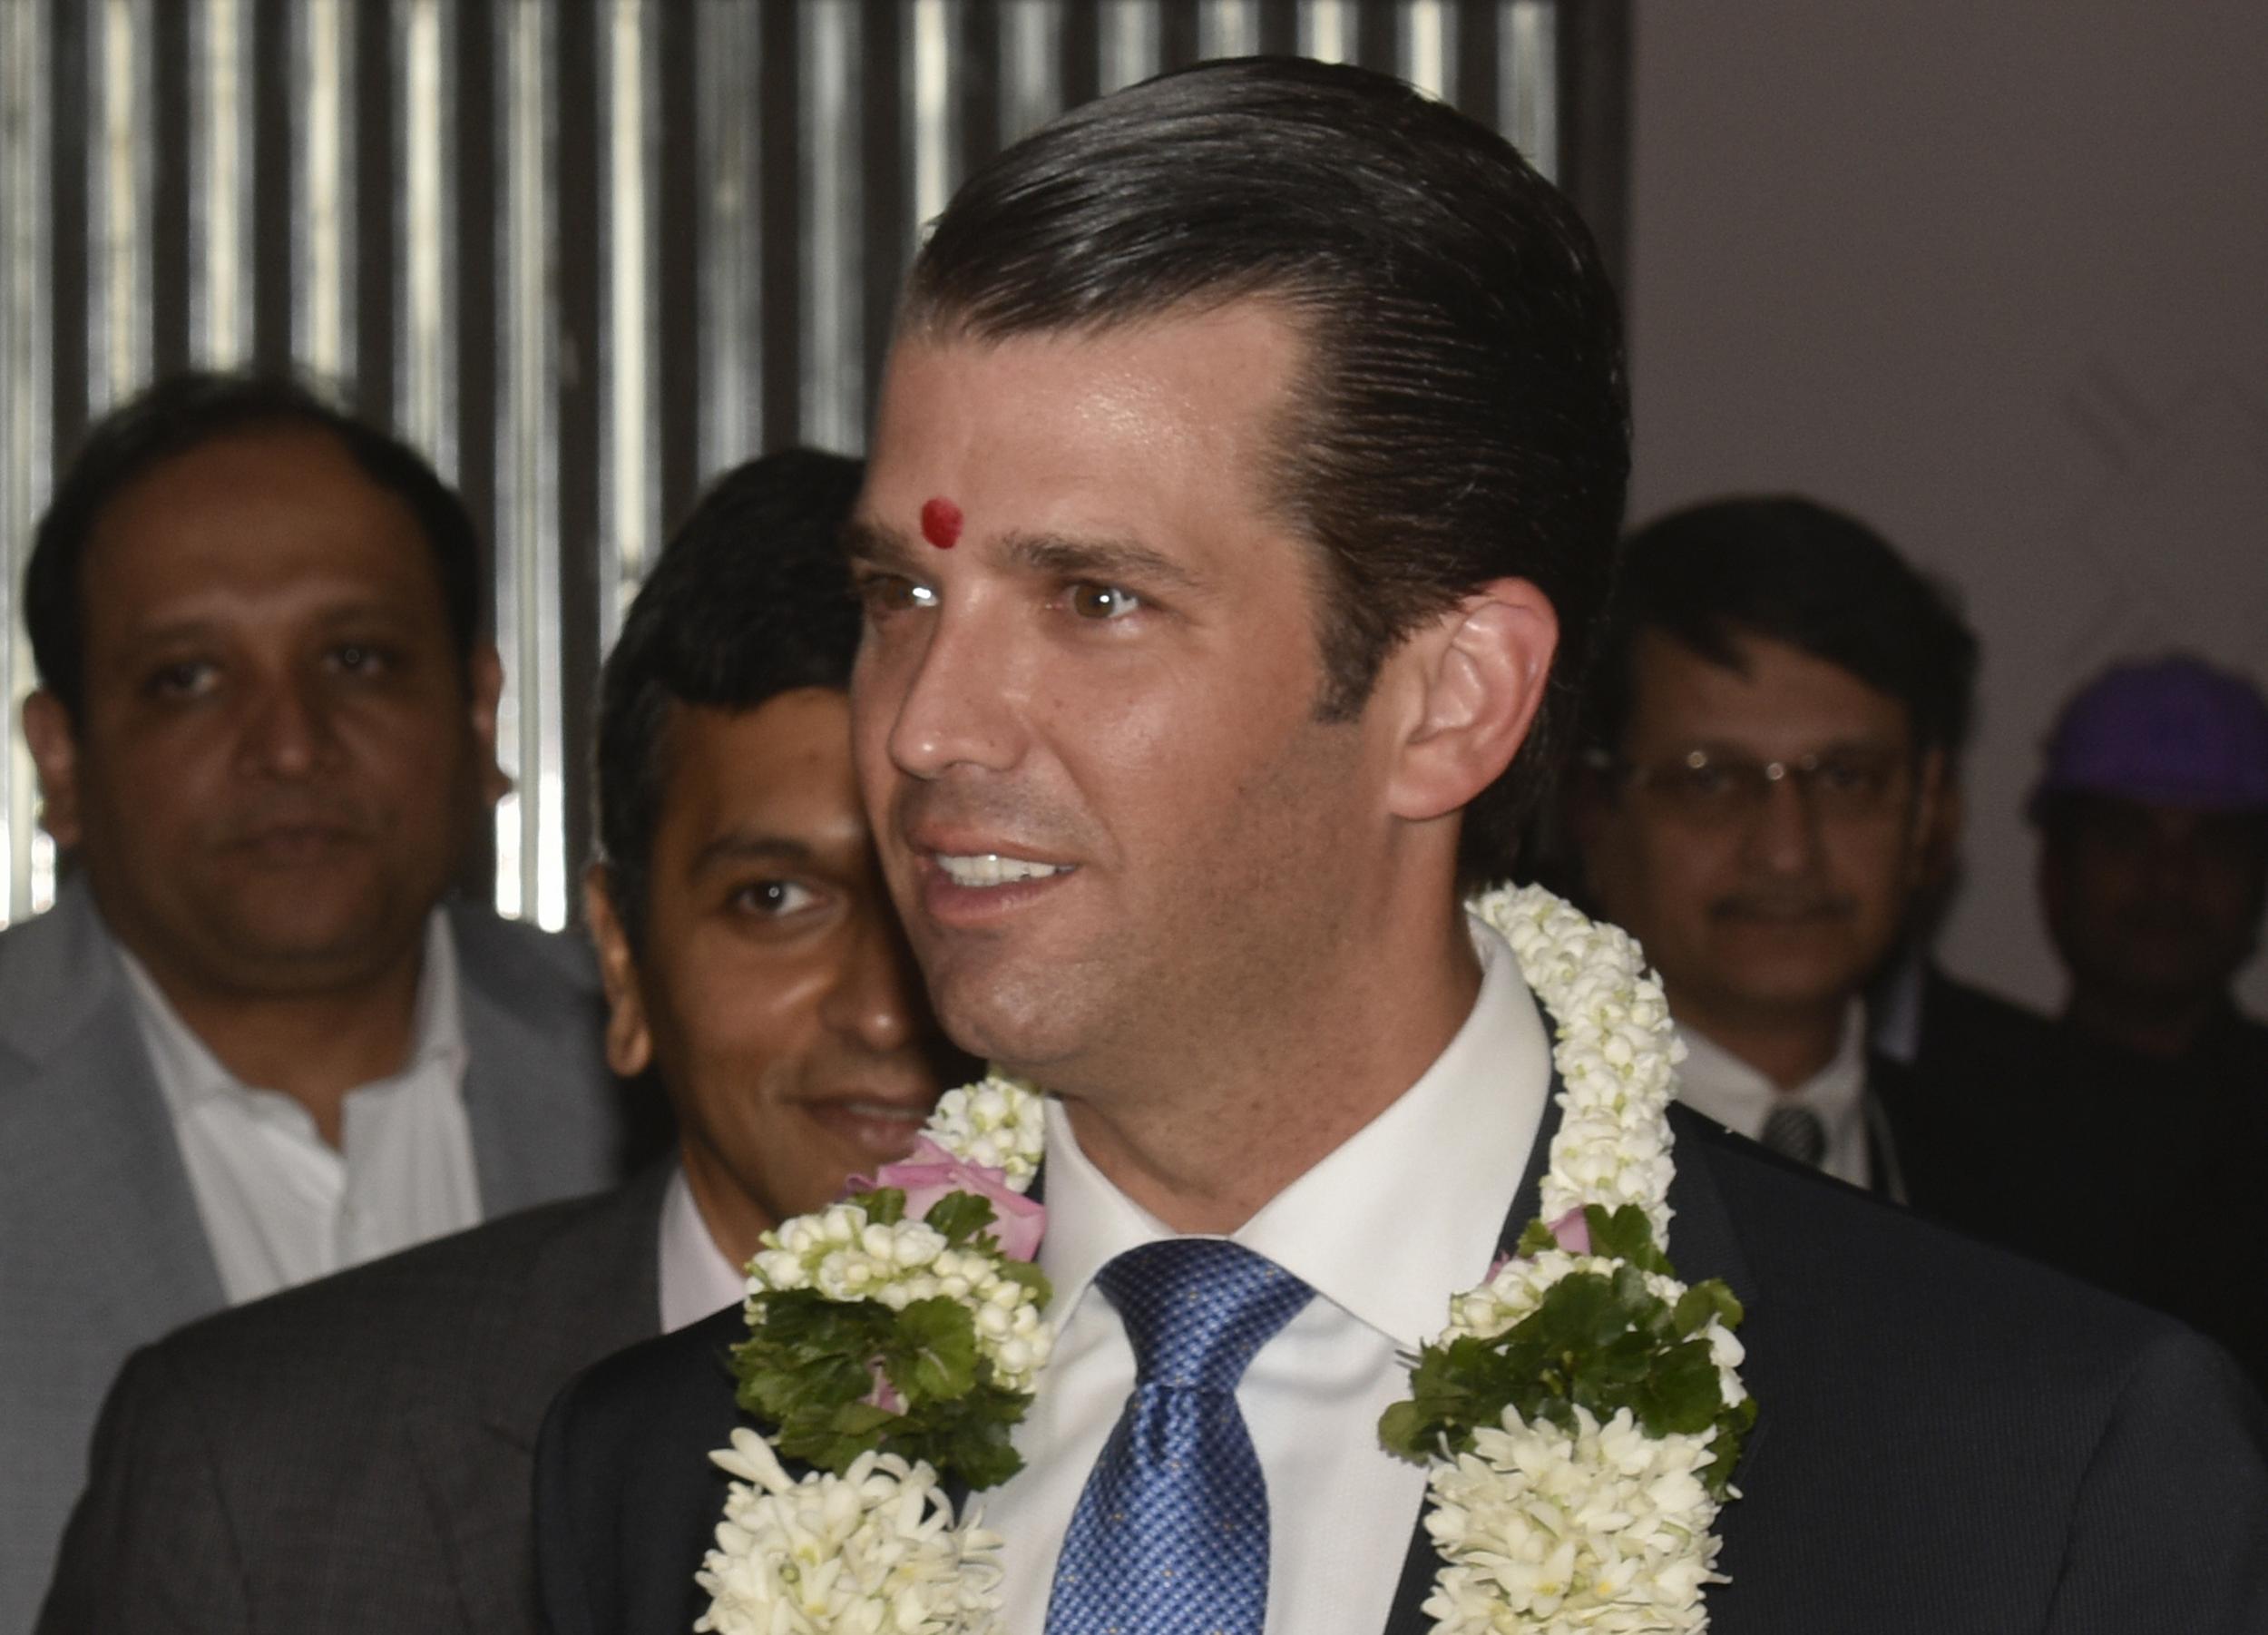 Donald Trump Jr attends an event at the Trump Tower in Mumbai, India